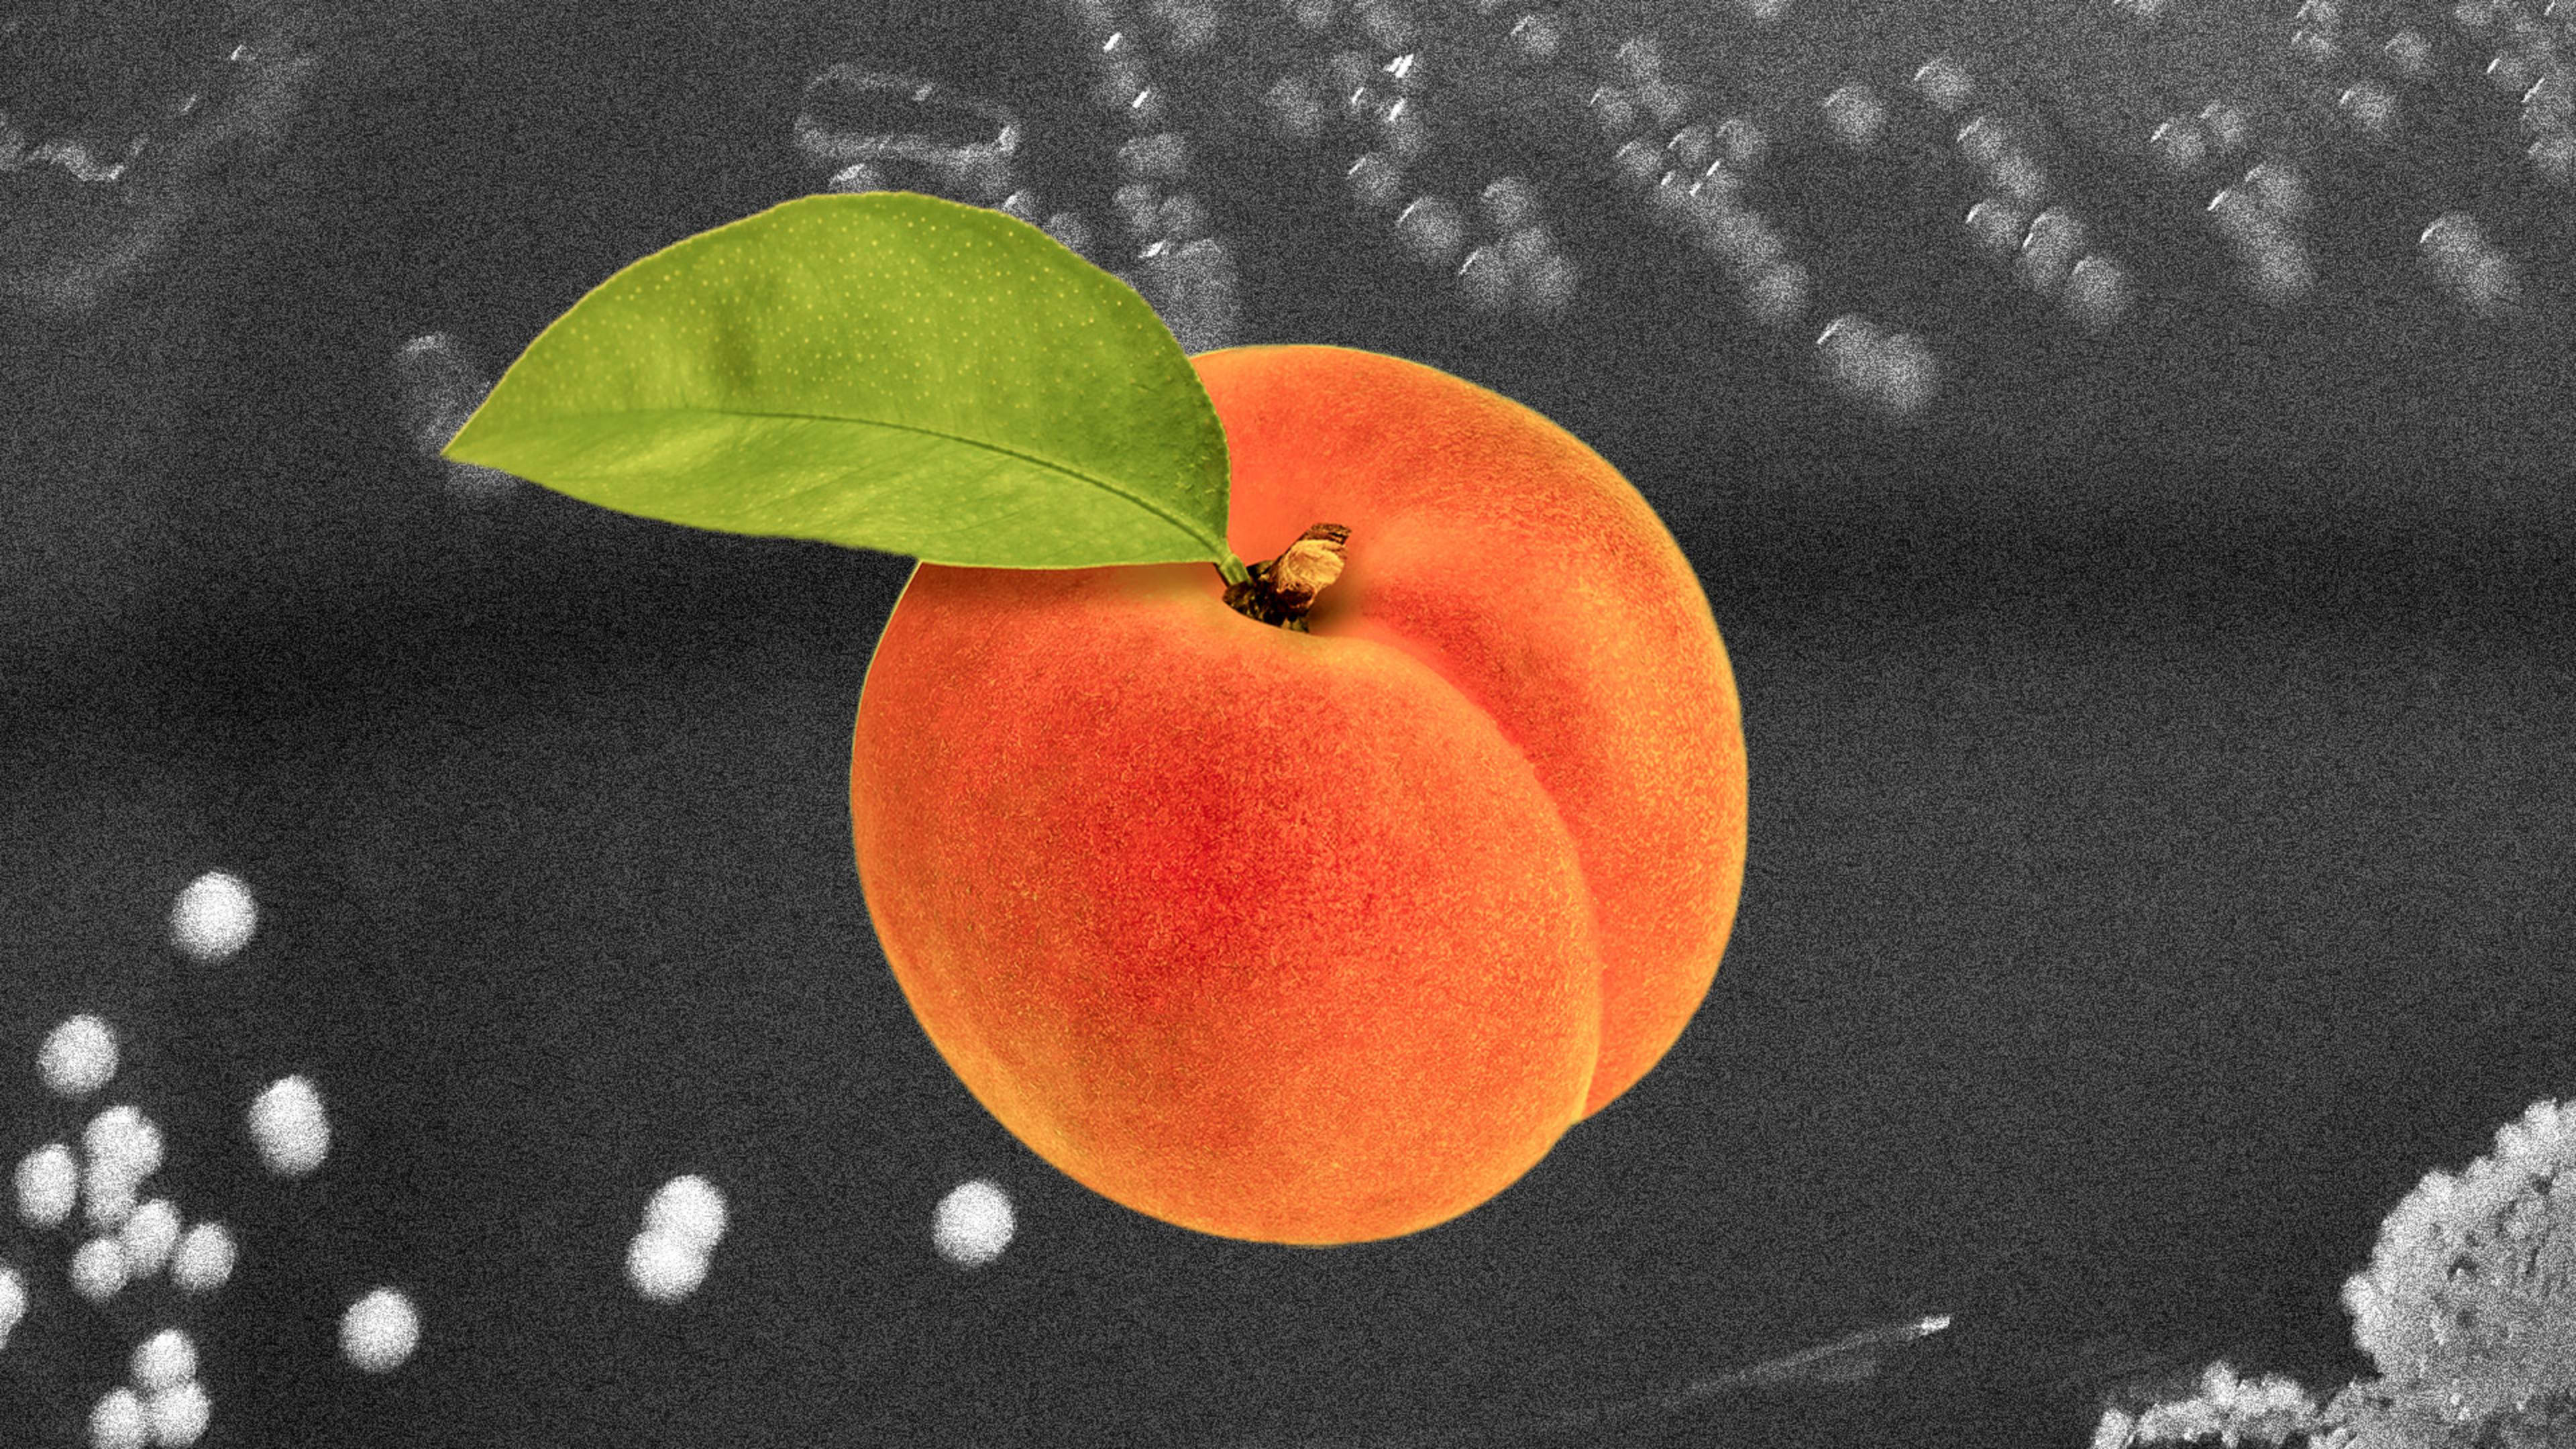 Listeria fruit outbreak: Contaminated peaches, plums, and nectarines leave one dead, more hospitalized, says CDC